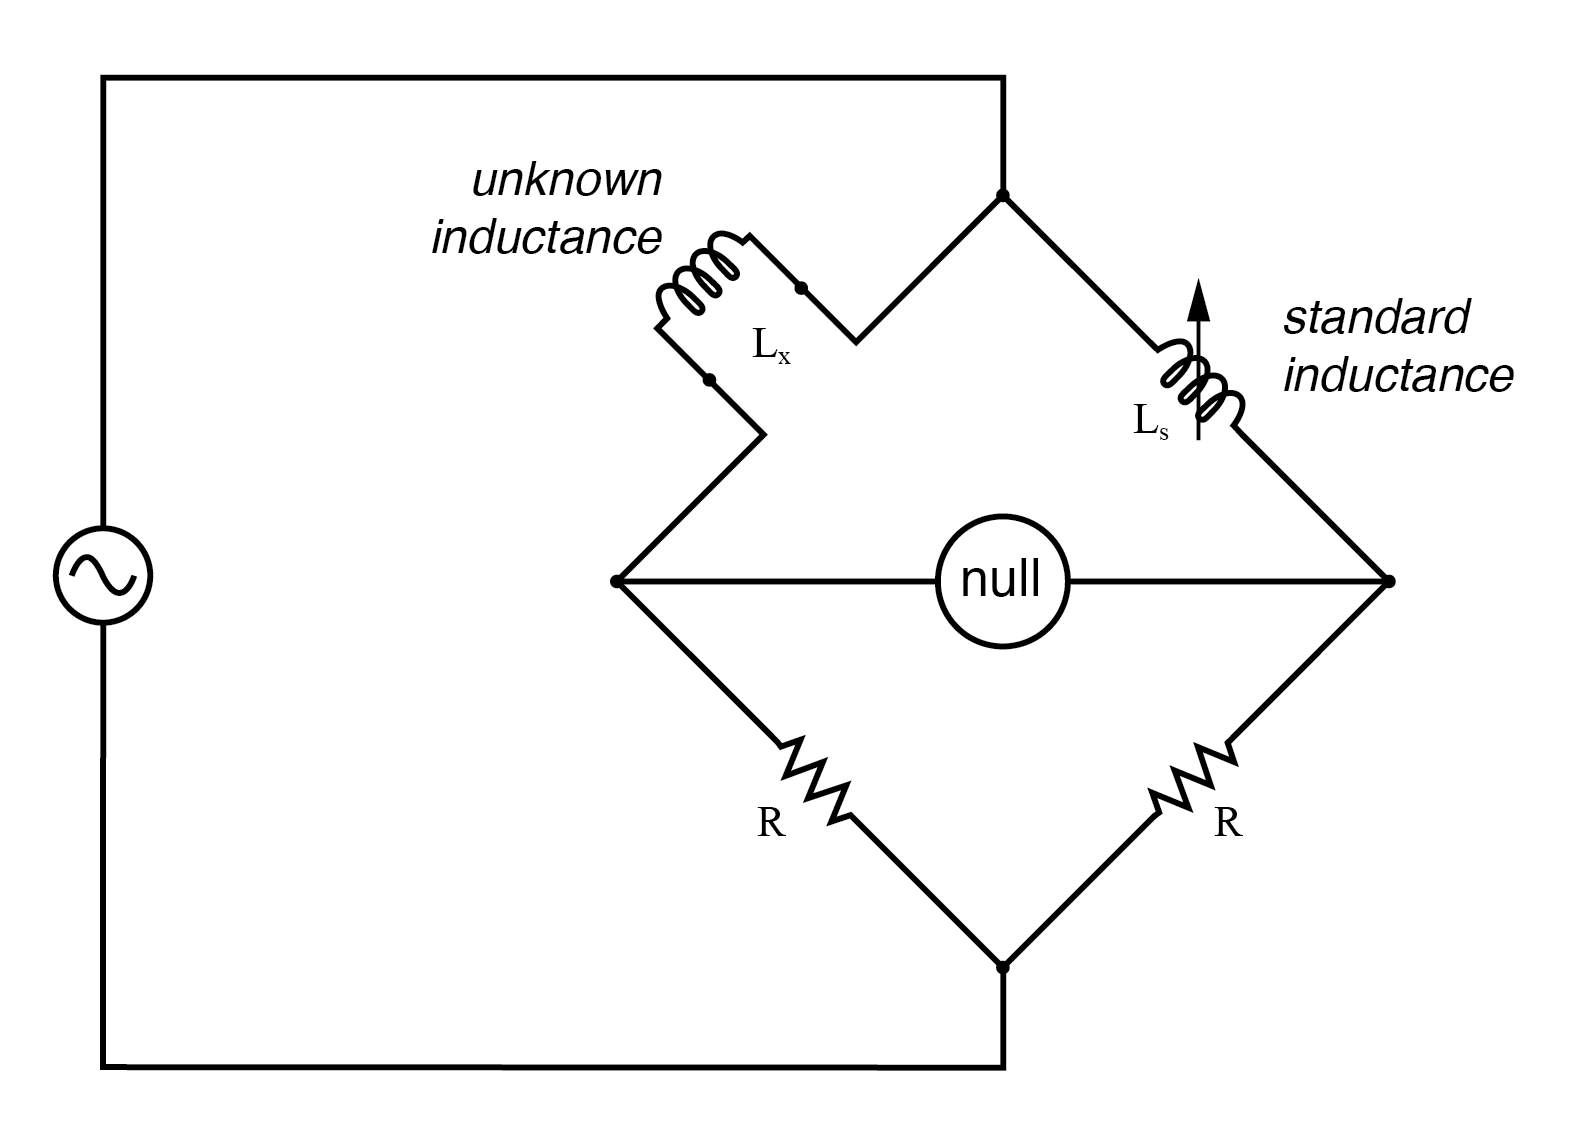 Symmetrical bridge measures unknown inductor by comparison to a standard inductor.